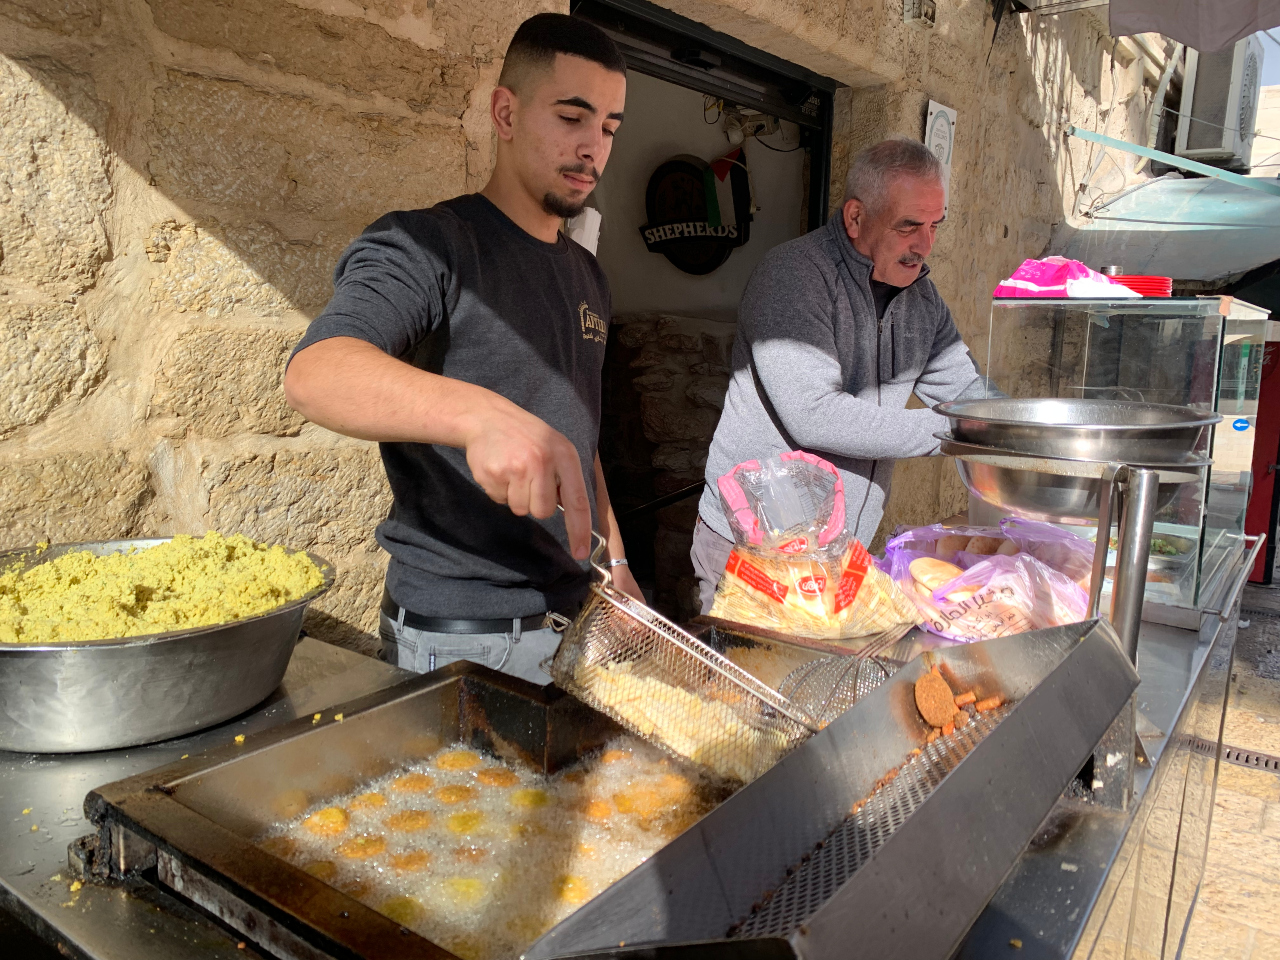 Afteem restaurant owner Saliba Salameh, right, said he had high hopes for the return of tourism to Bethlehem this year, but those hopes had been dashed (MEE/Shatha Hammad)